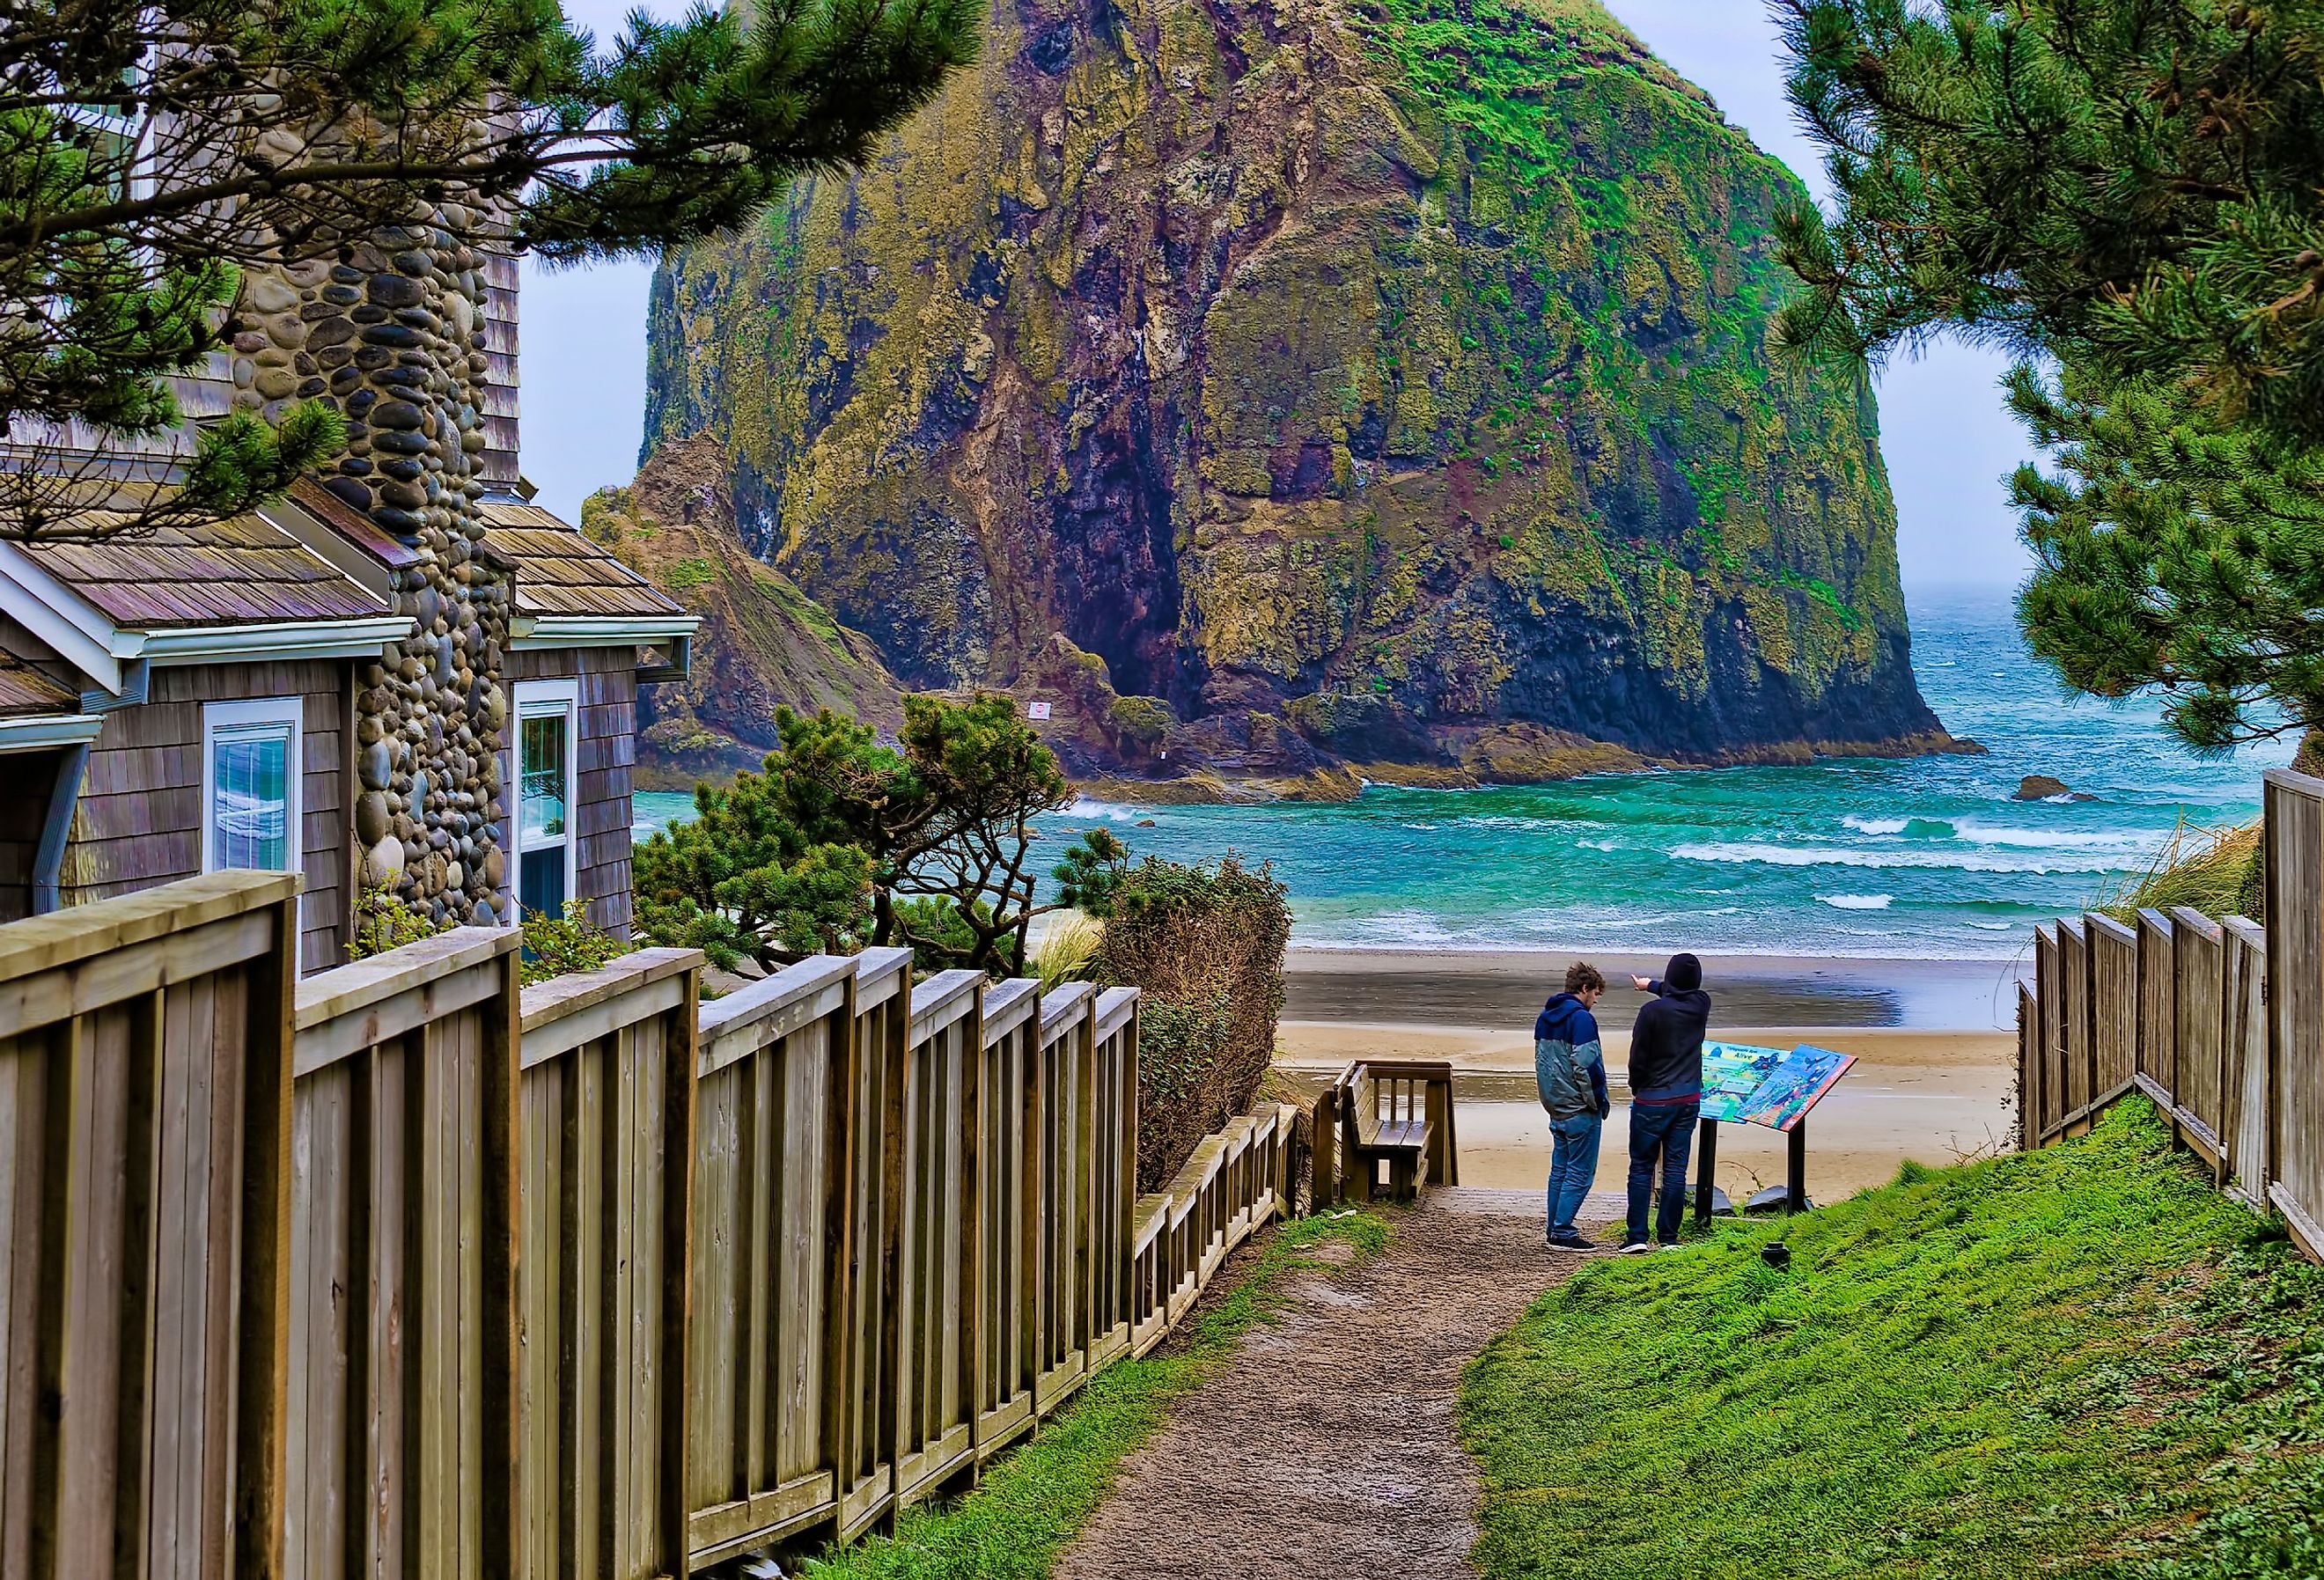 Public beach access path at Cannon Beach, Oregon, with a view of the stunning coastline with Haystack Rock.